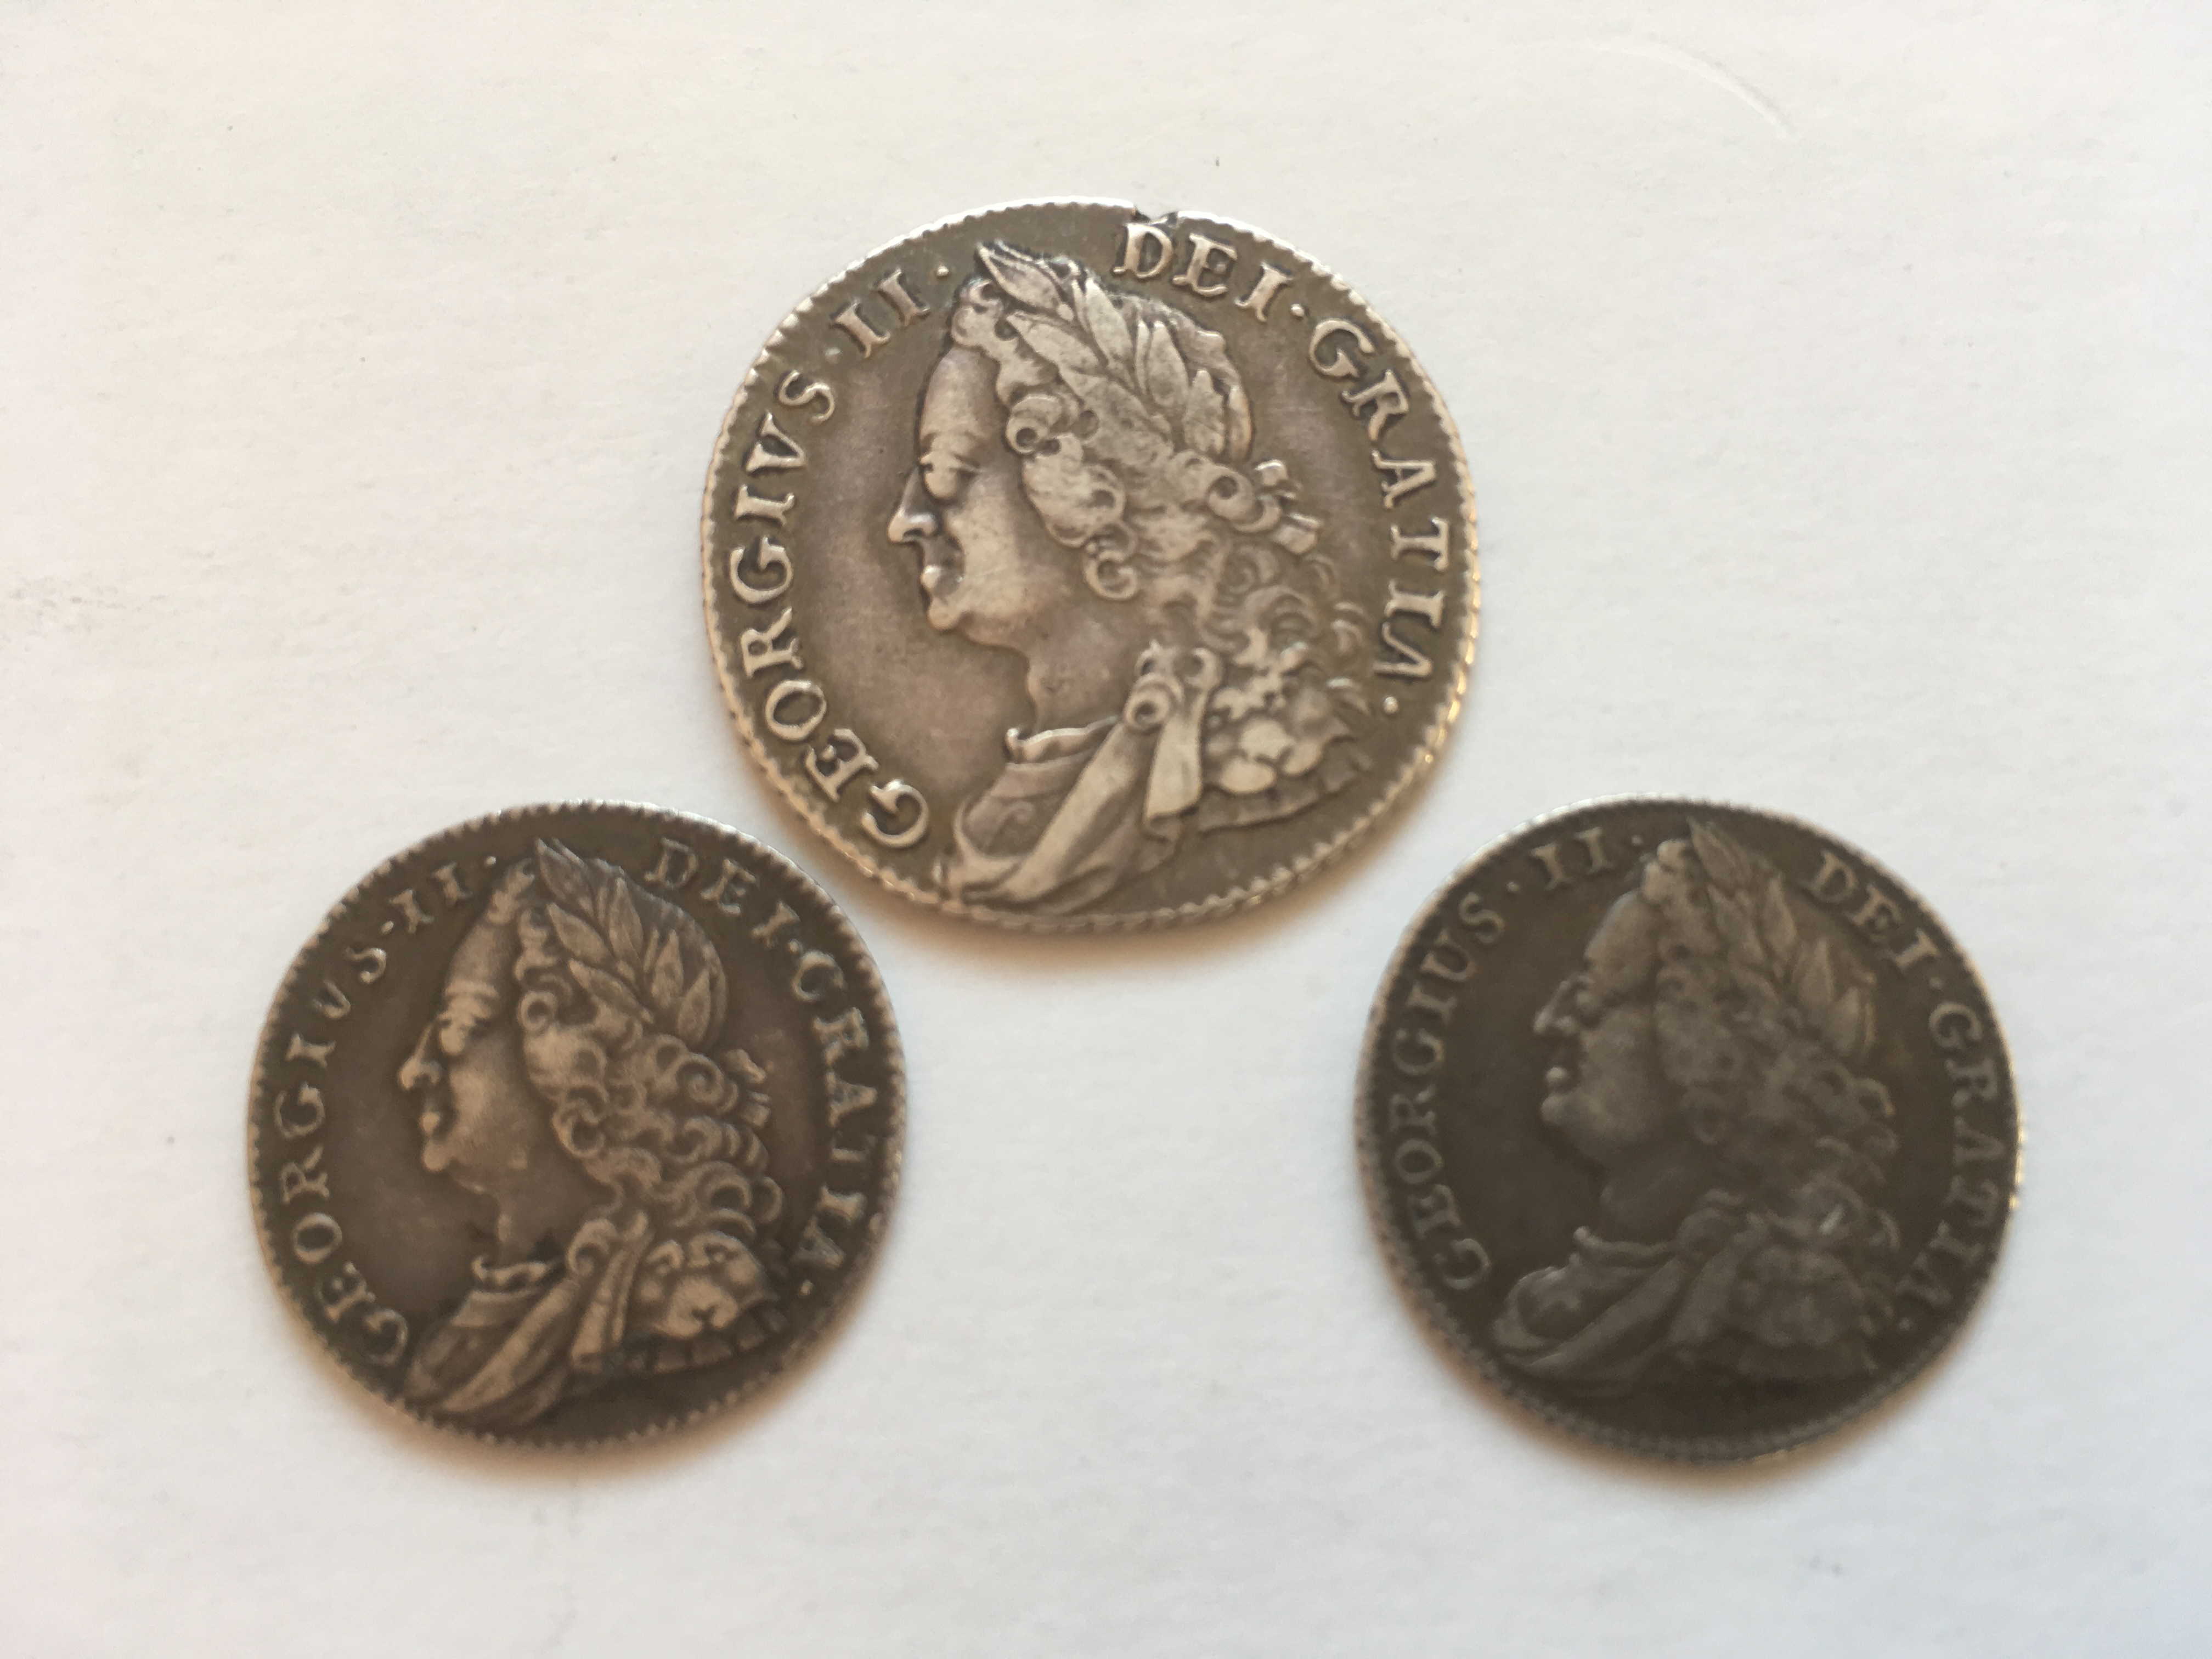 GB COINS: SHILLING 1750 (SMALL INCLUSION) SIXPENCE 1743,